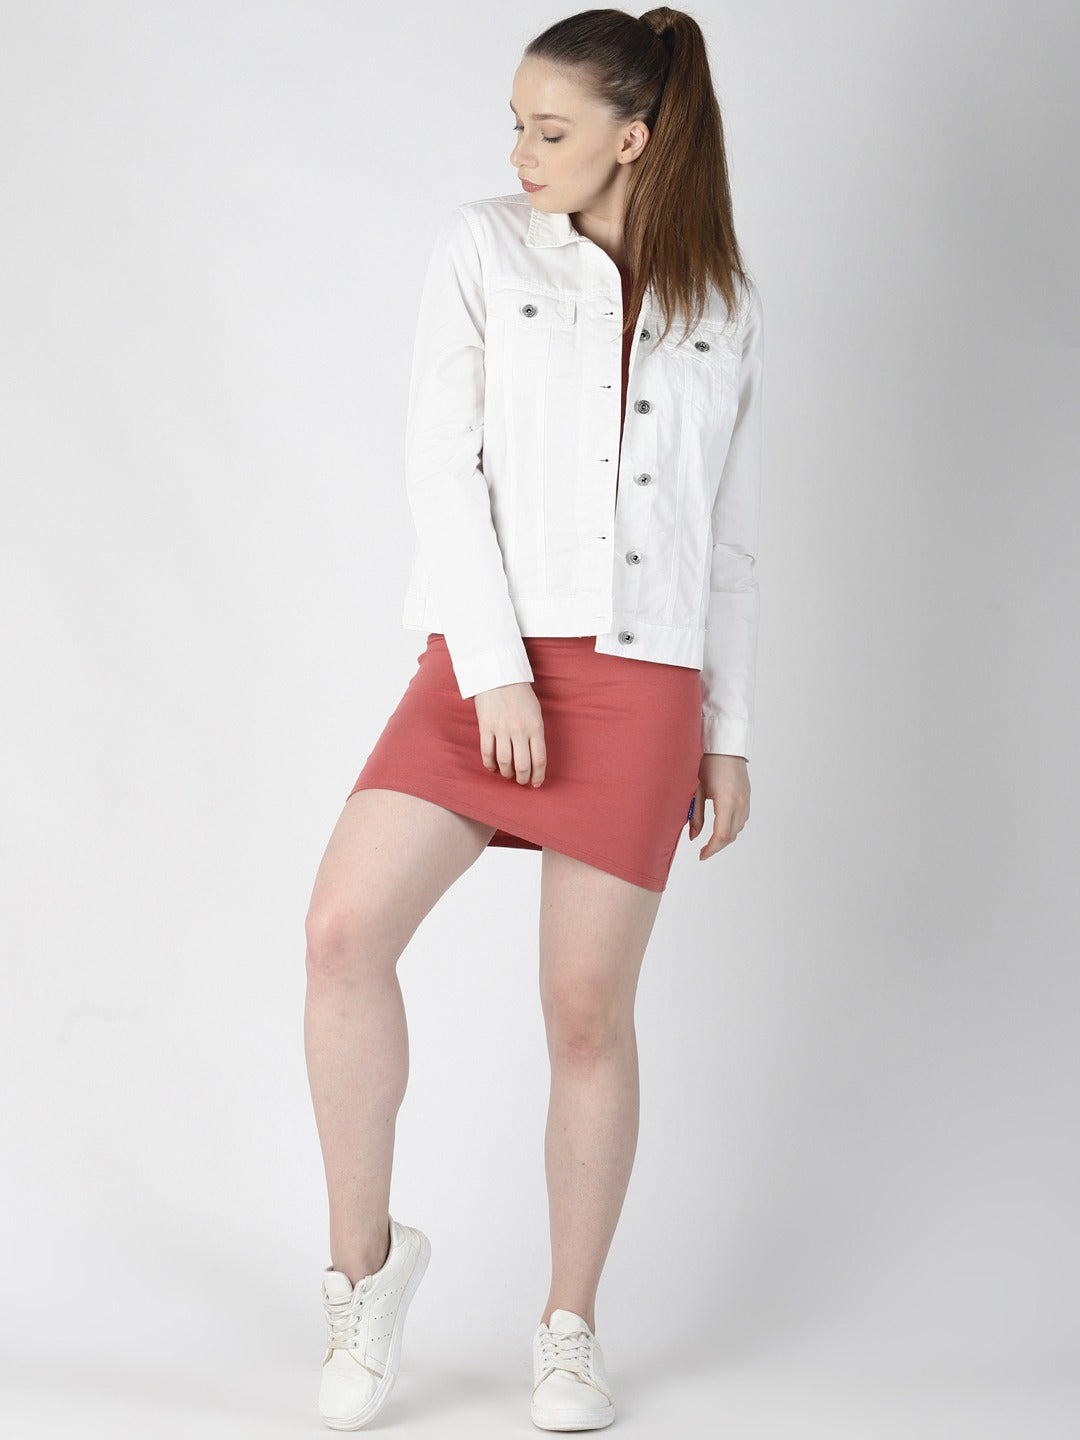 White solid women's denim jacket, red mini skirt, and white sneakers on a white background.